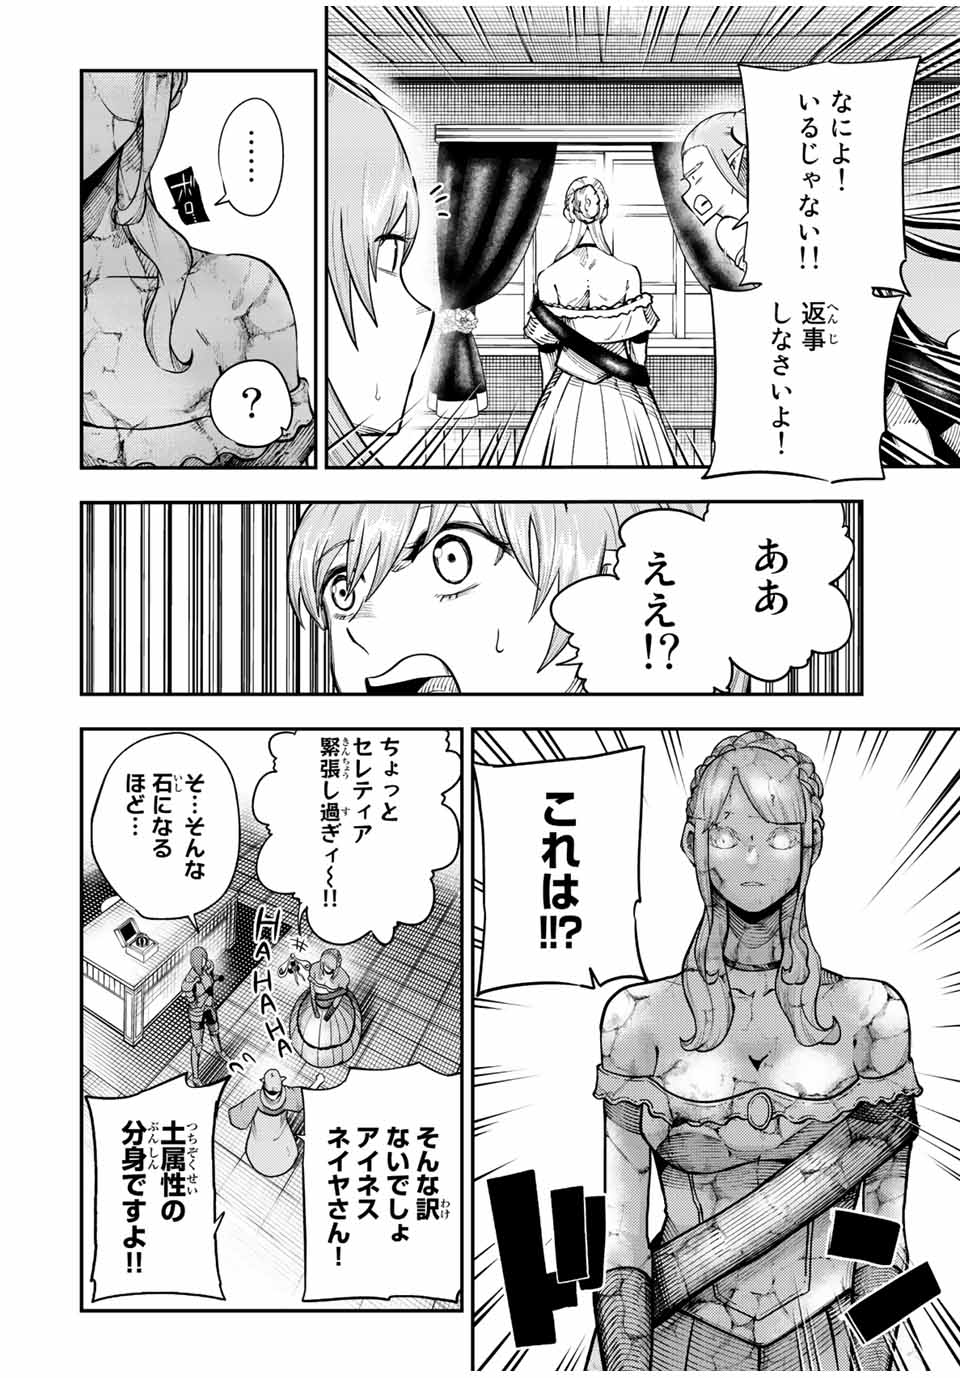 the strongest former prince-; 奴隷転生 ～その奴隷、最強の元王子につき～ 第116話 - Page 16